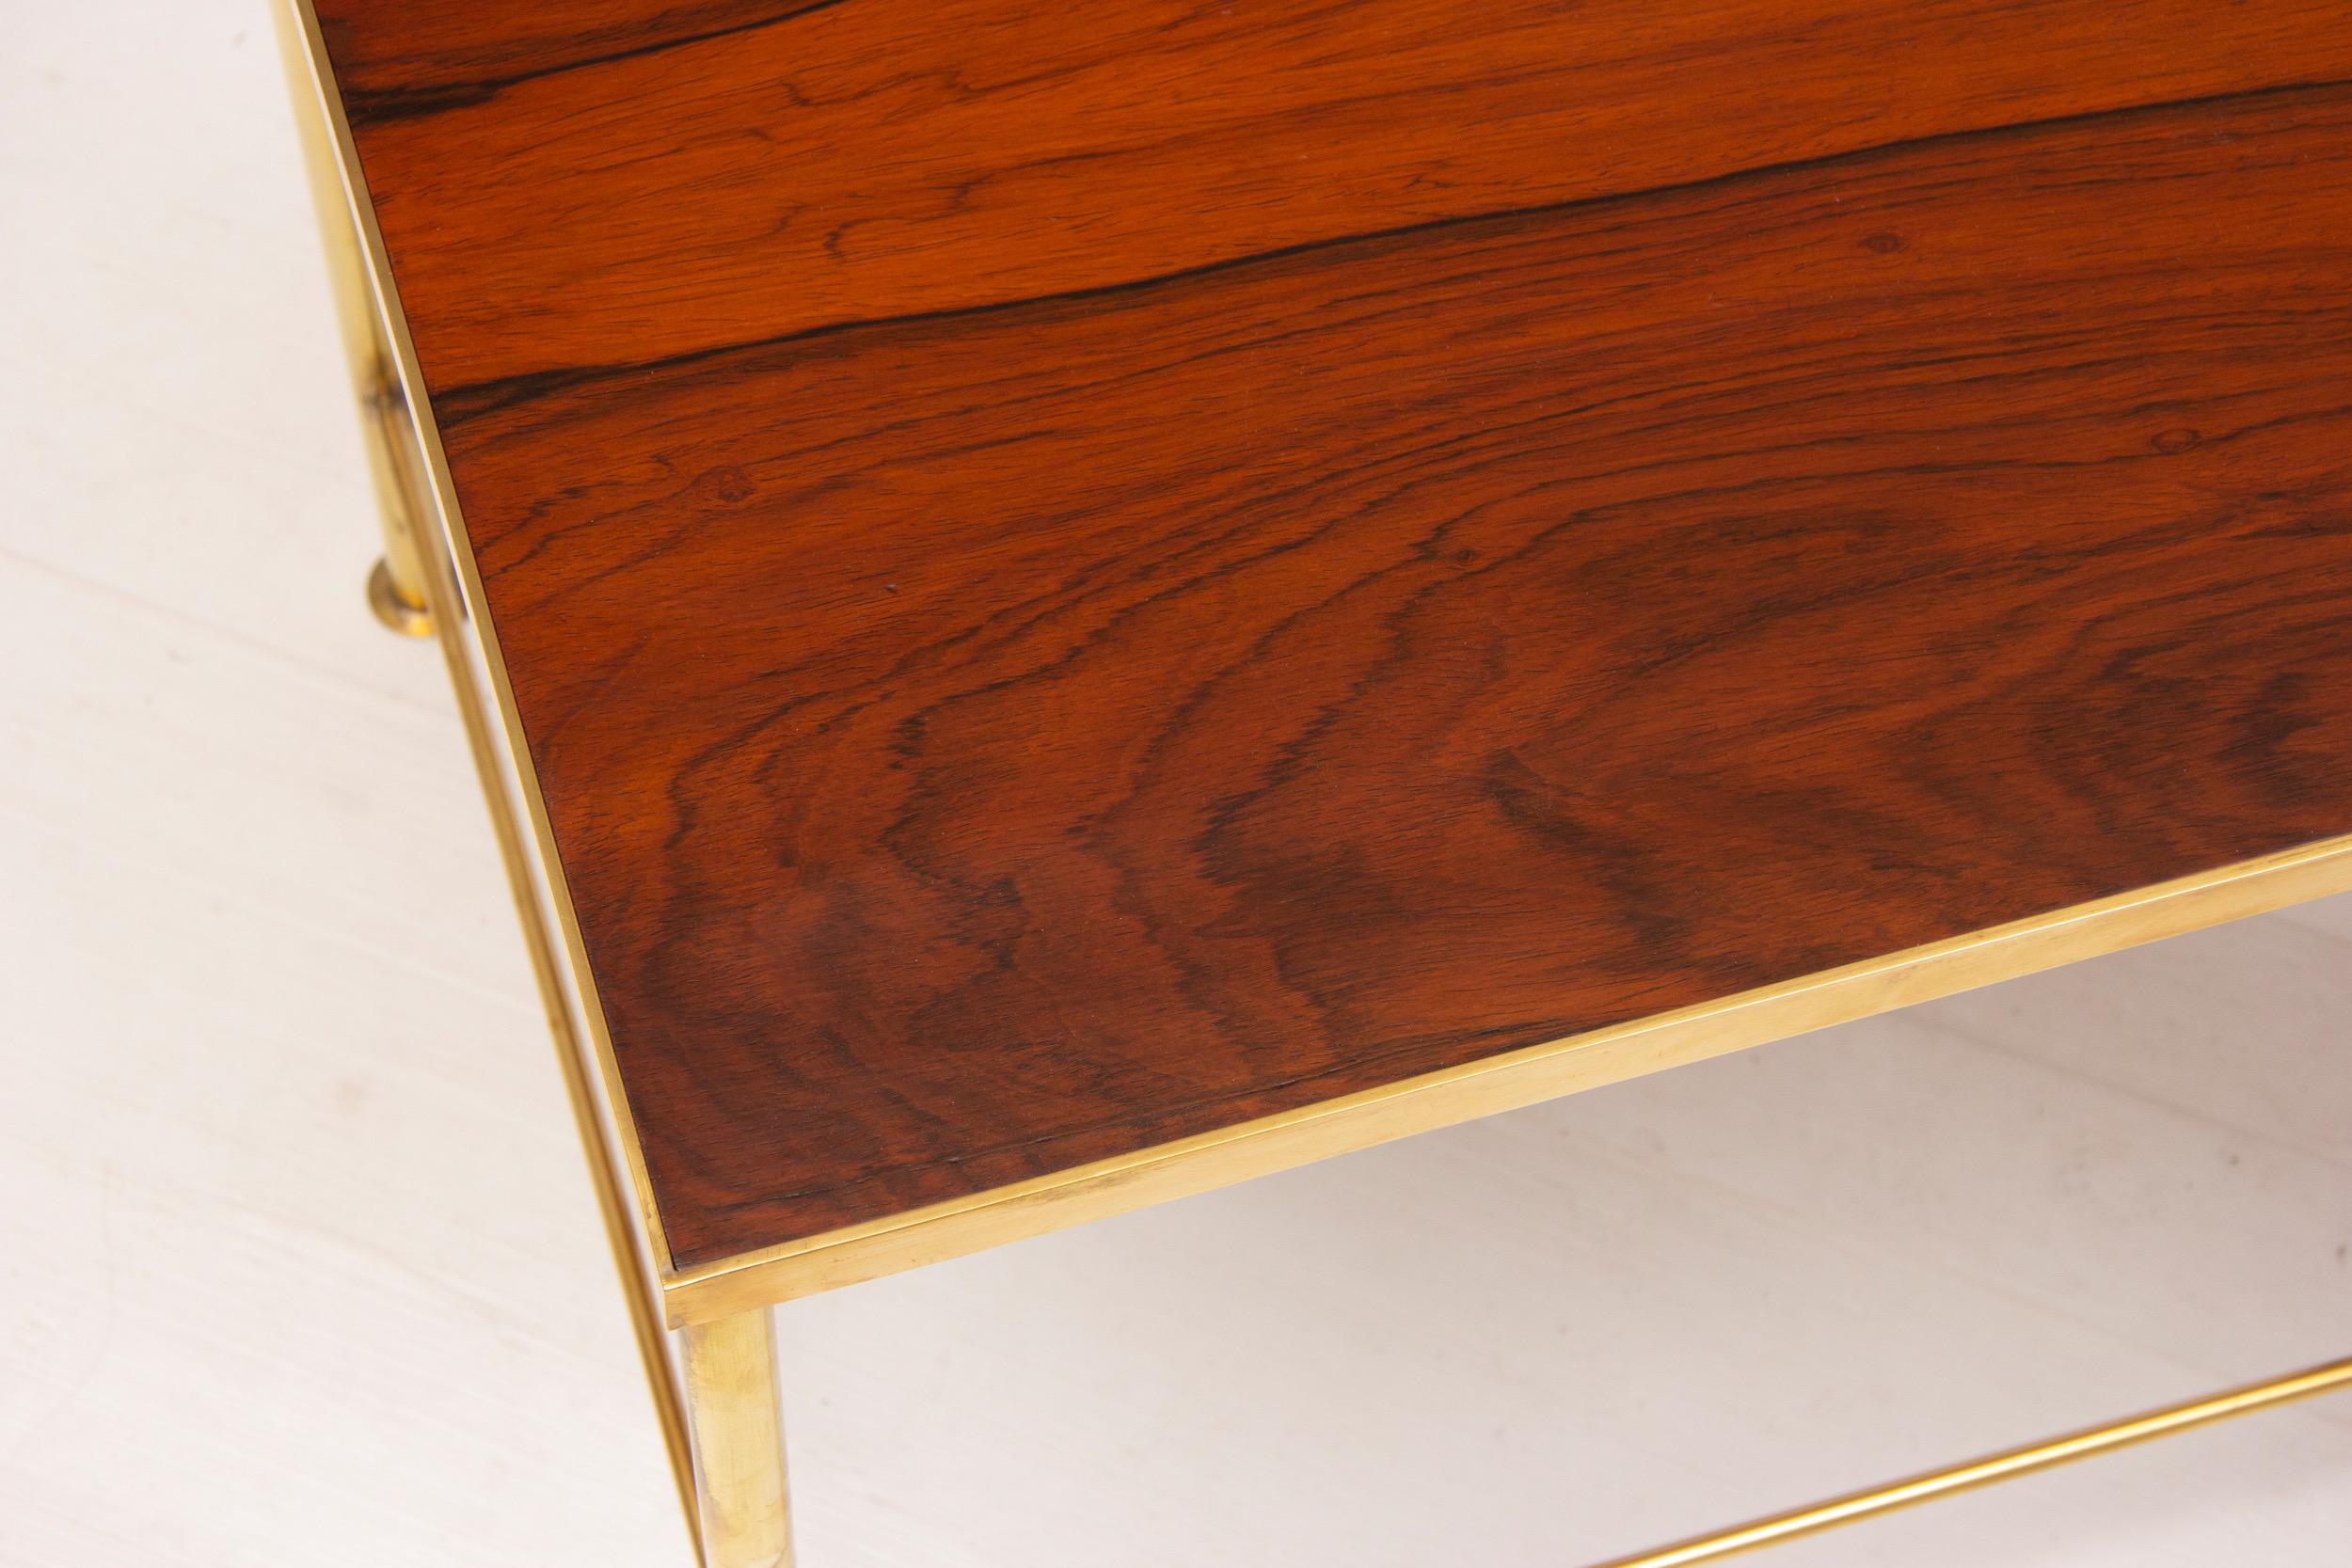 A pair of midcentury cocktail or coffee tables.
A pair of midcentury tables with rosewood tops and polished golden brass frames.
Measures: H 46 cm, W 62 cm, D 47 cm.
Italy, circa 1960.